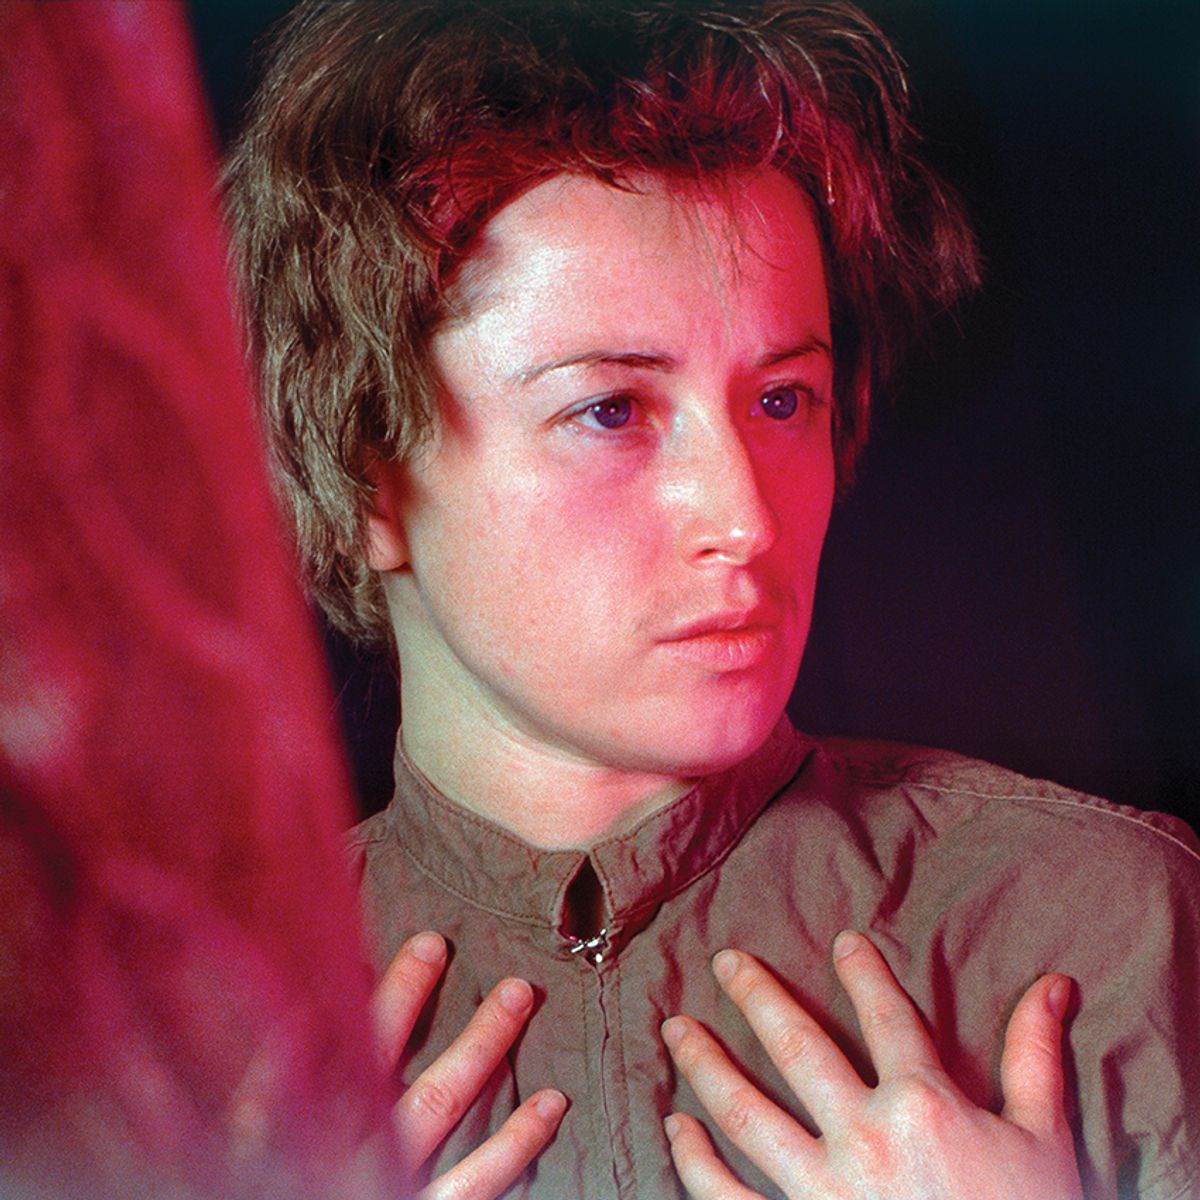 Untitled #109 (1982) by Cindy Sherman, one of nine women artists in the Close-Up exhibition at the Beyeler Foundation © 2021 Cindy Sherman